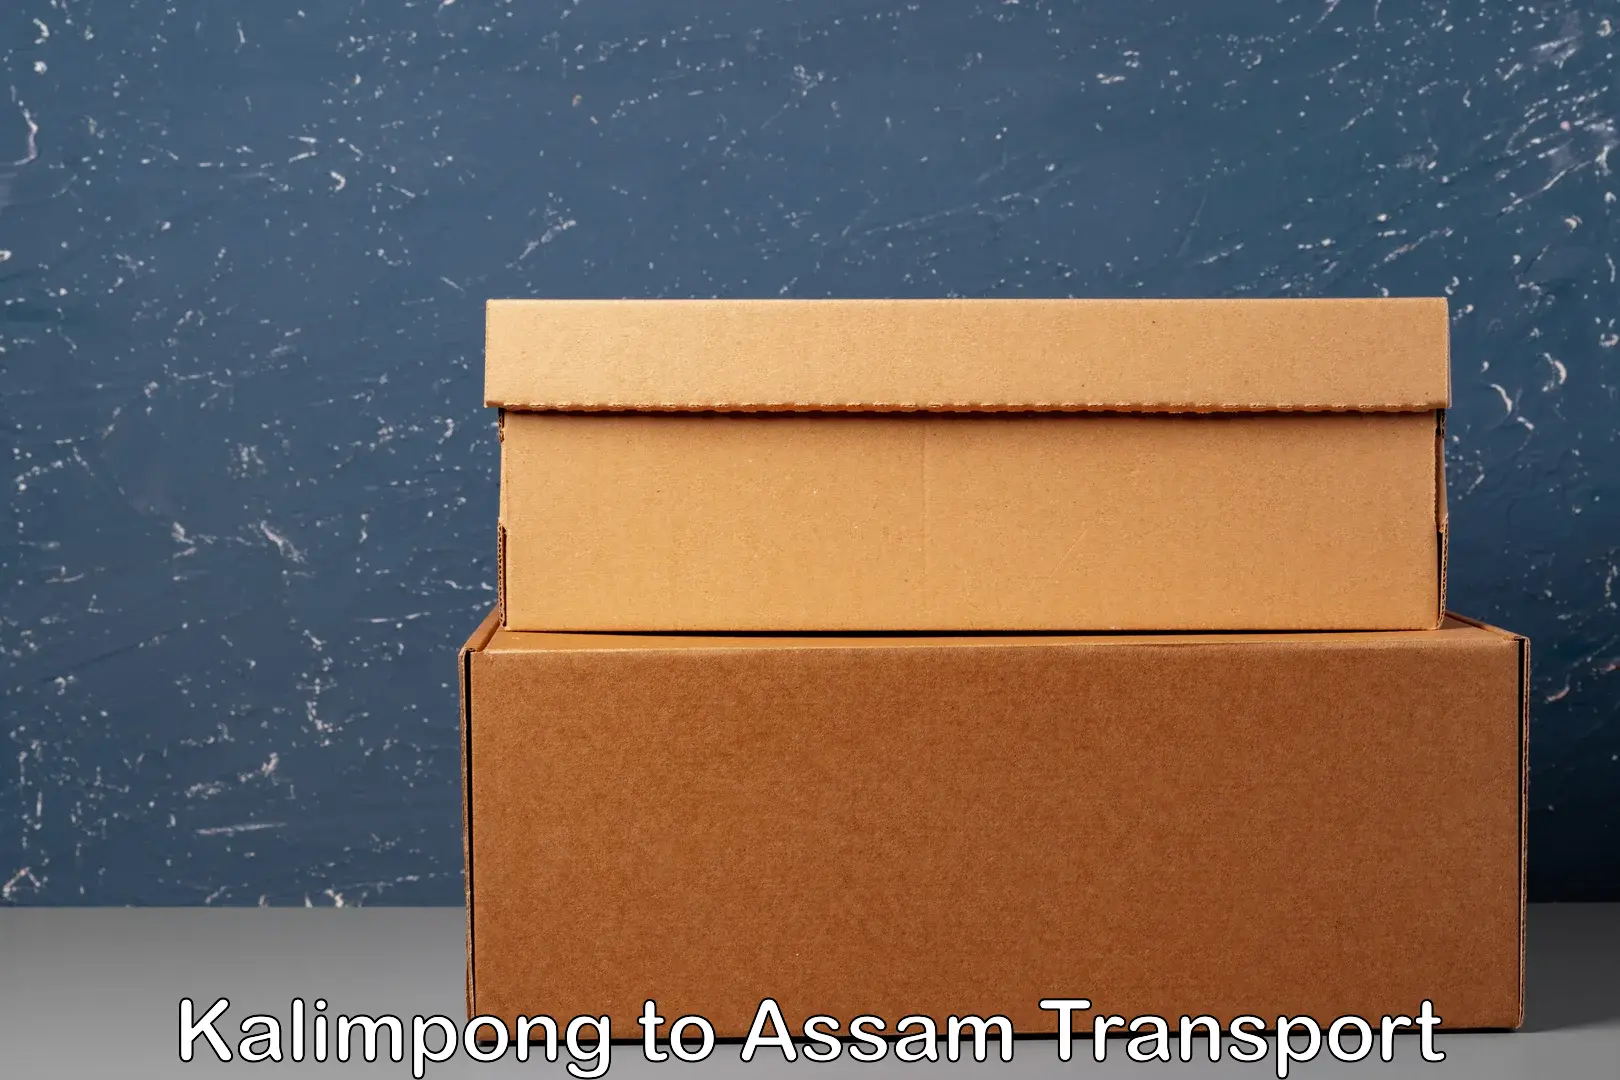 Cycle transportation service Kalimpong to Assam